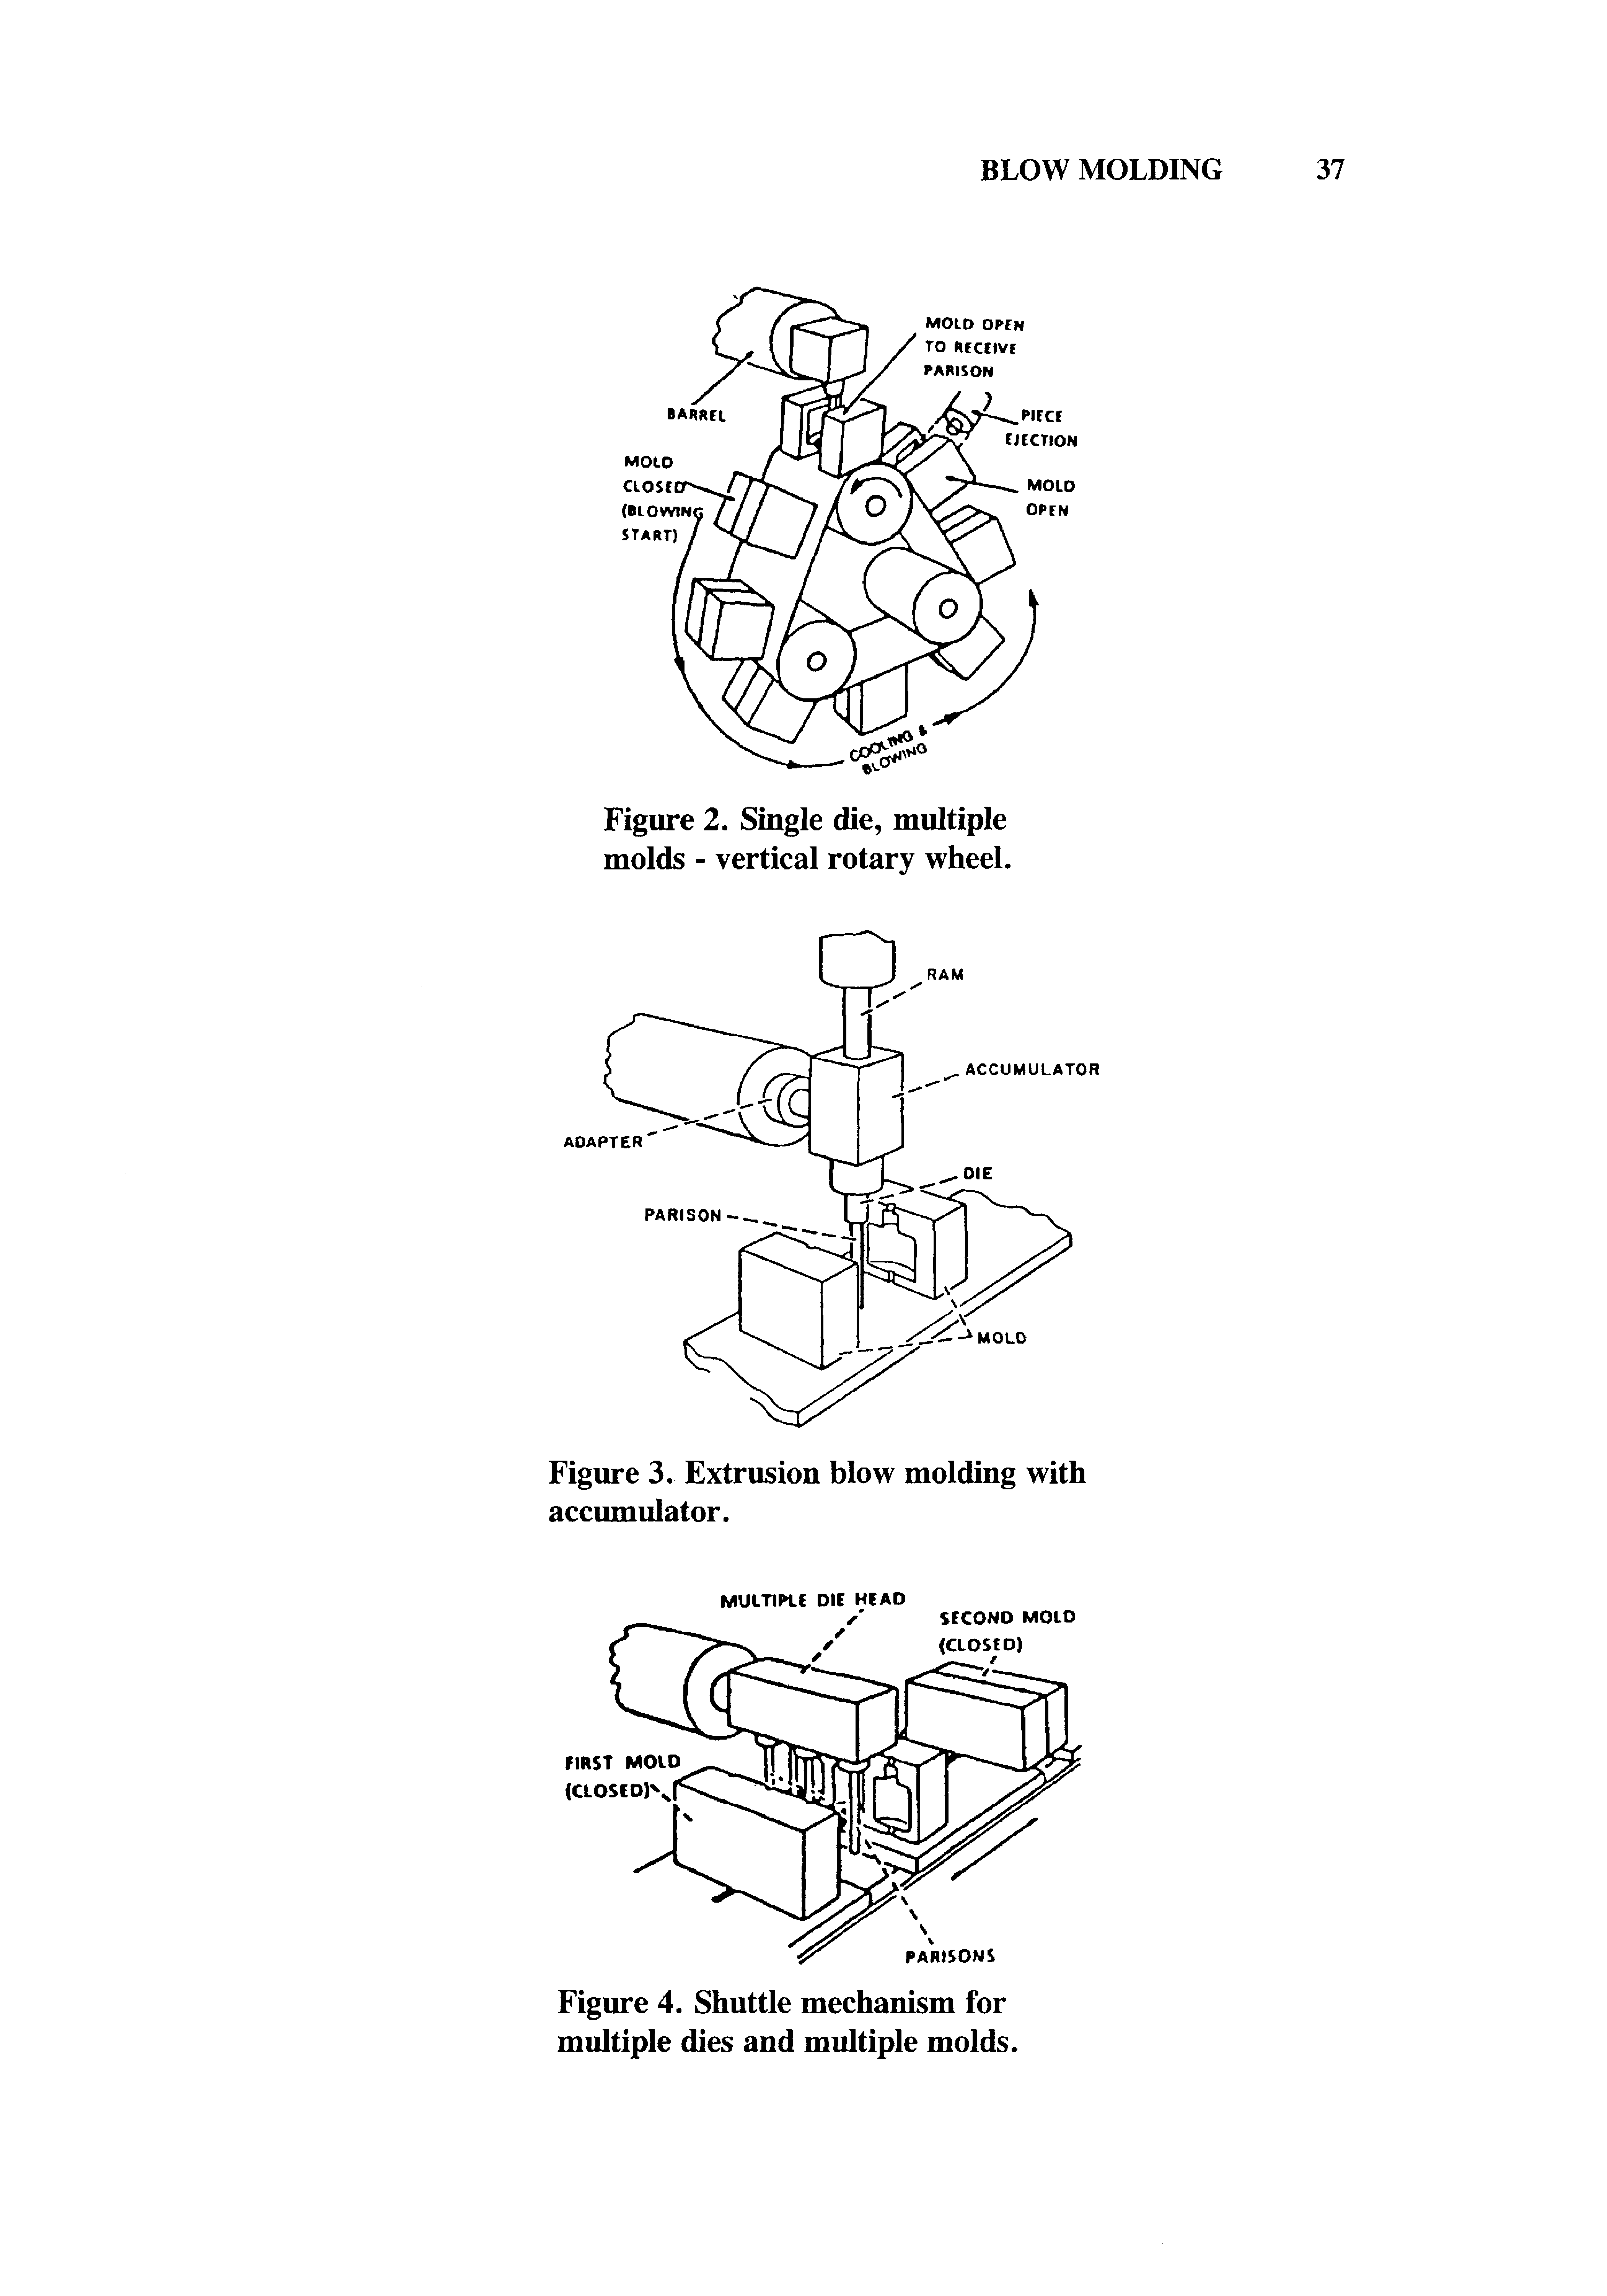 Figure 3. Extrusion blow molding with accumulator.